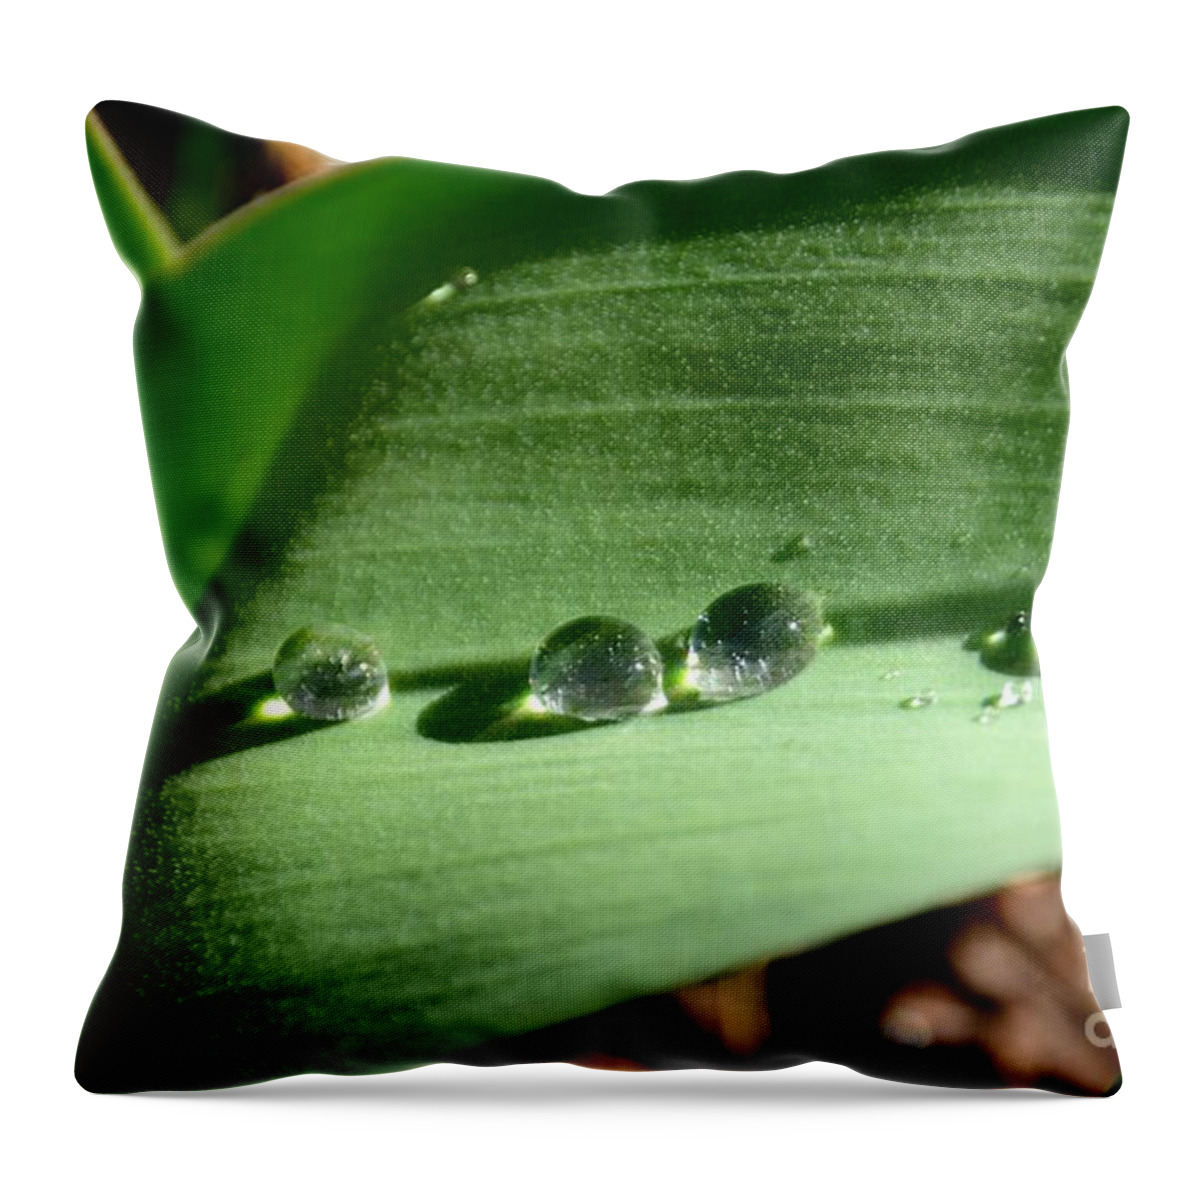 Adrian-deleon Throw Pillow featuring the photograph Rain Drops rolling down to the other side. by Adrian De Leon Art and Photography